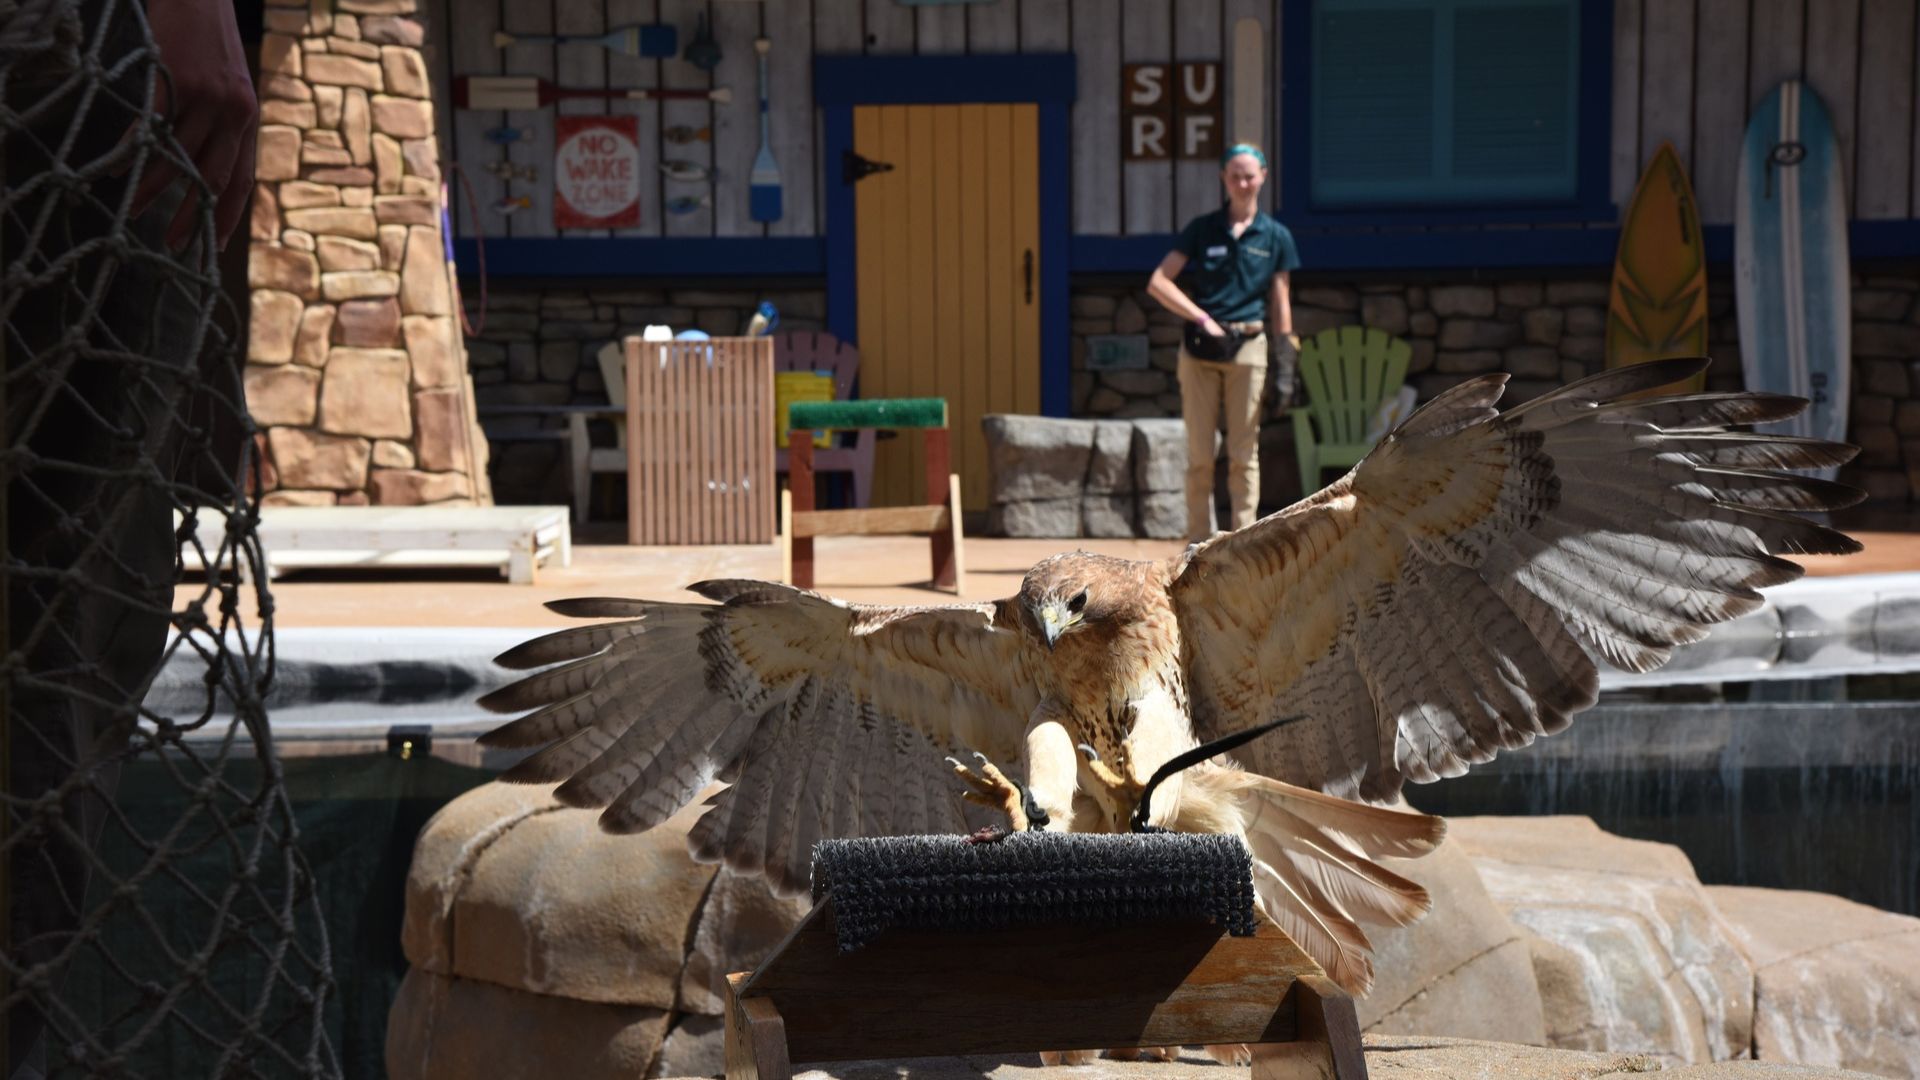 See Winging It, a new bird show, at the Saint Louis Zoo.